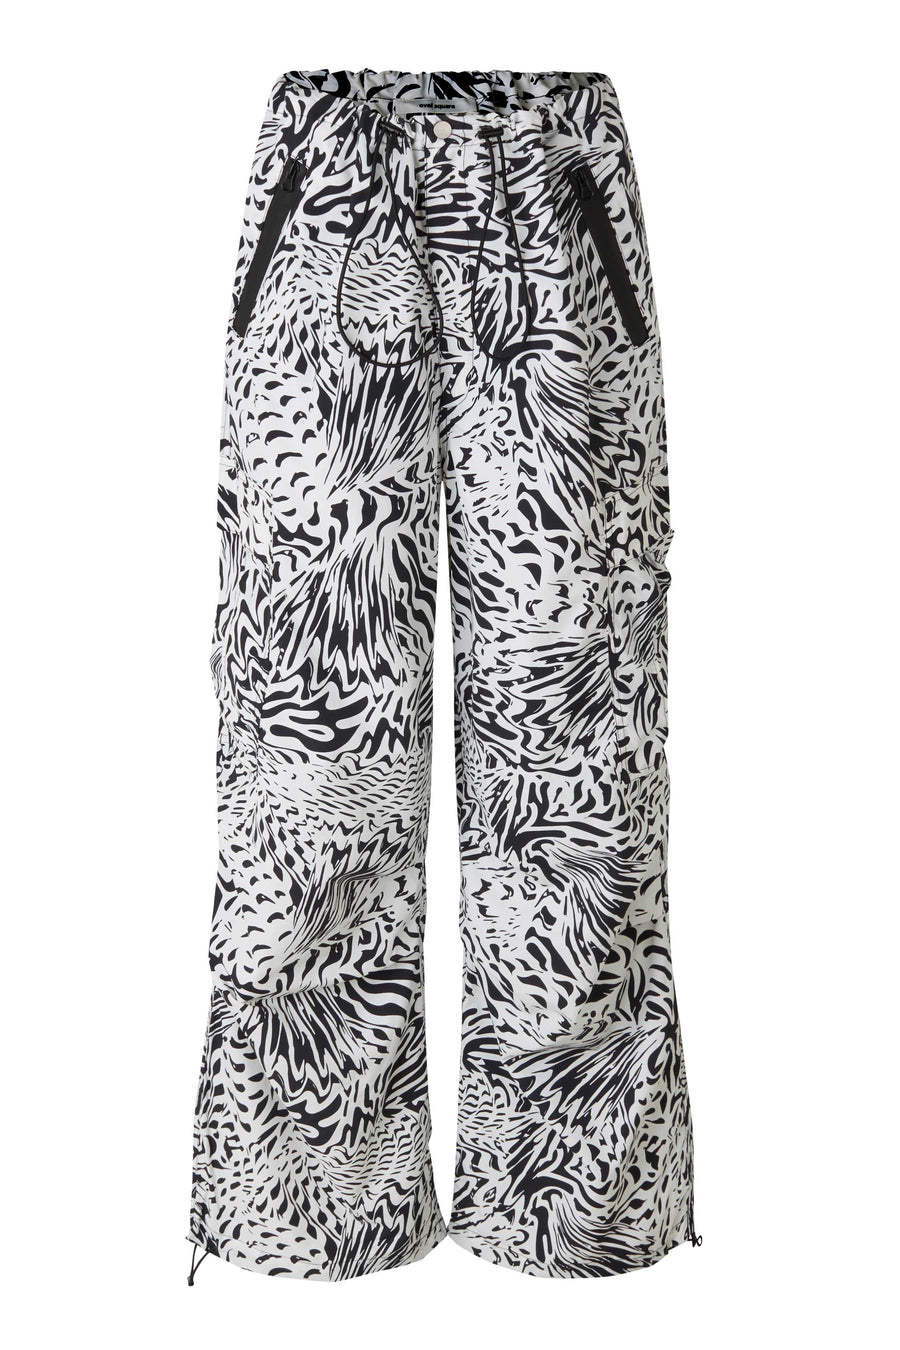 OS Poison trousers